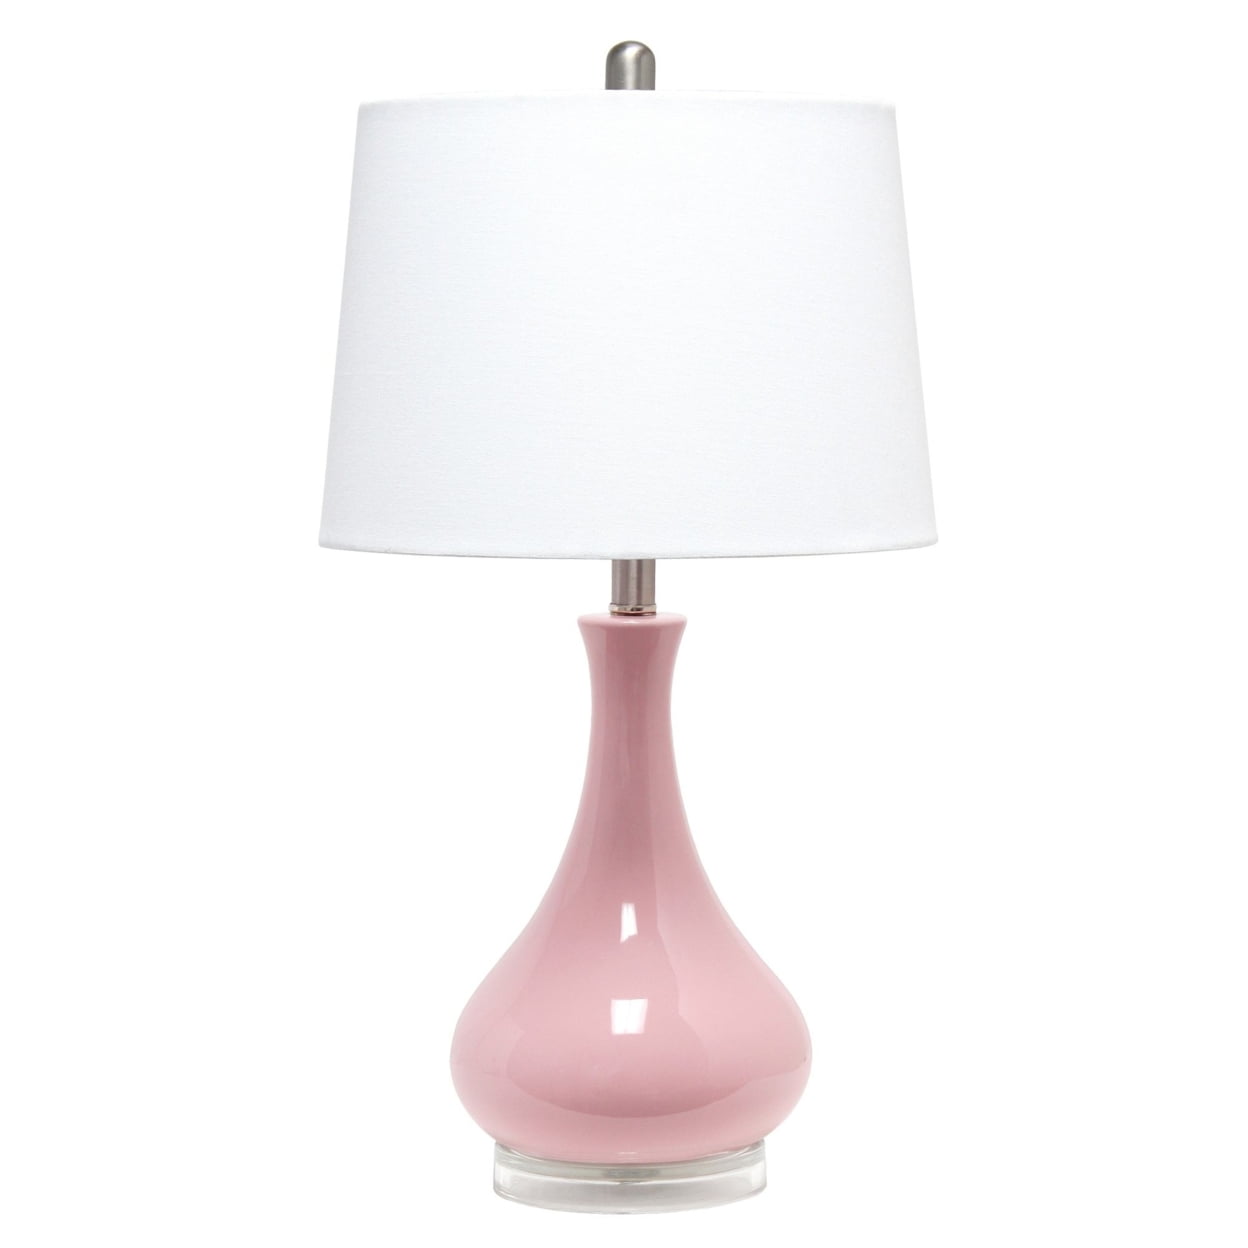 Lalia Home Droplet Table Lamp with Fabric Shade, Rose Pink